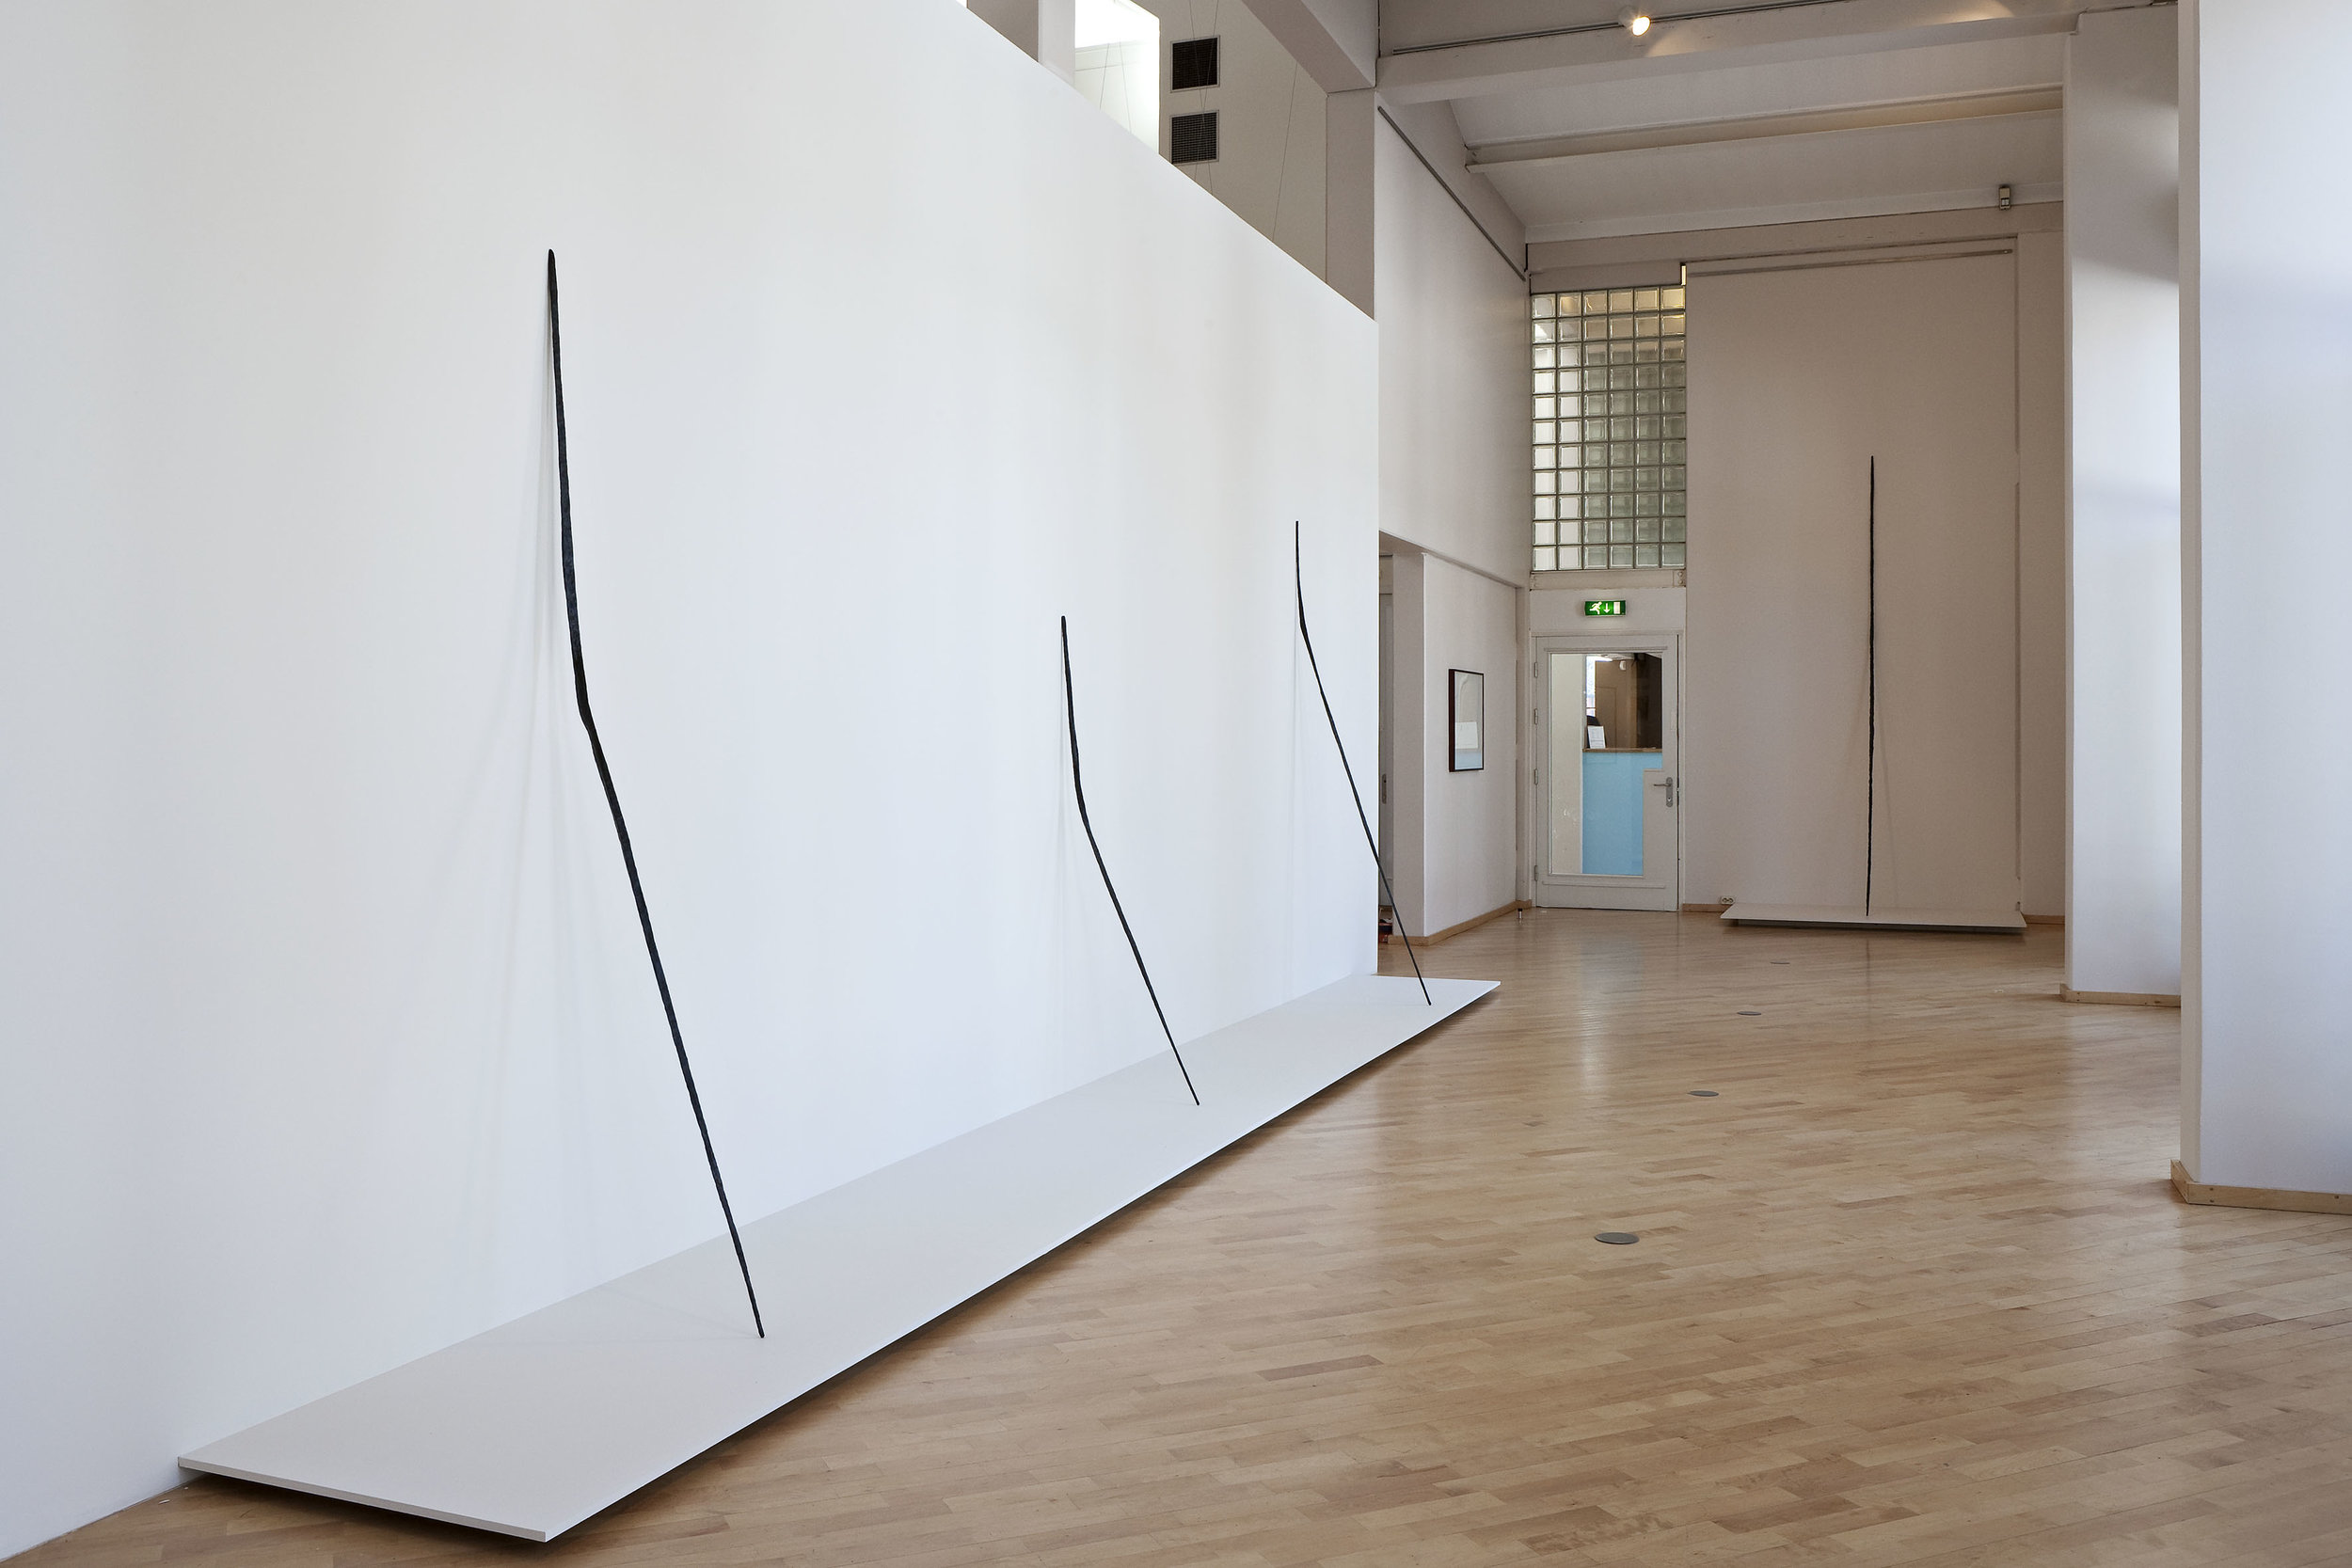  Installation view, Jan Groth, New works and projects, Drammens Museum, Drammen 2009 